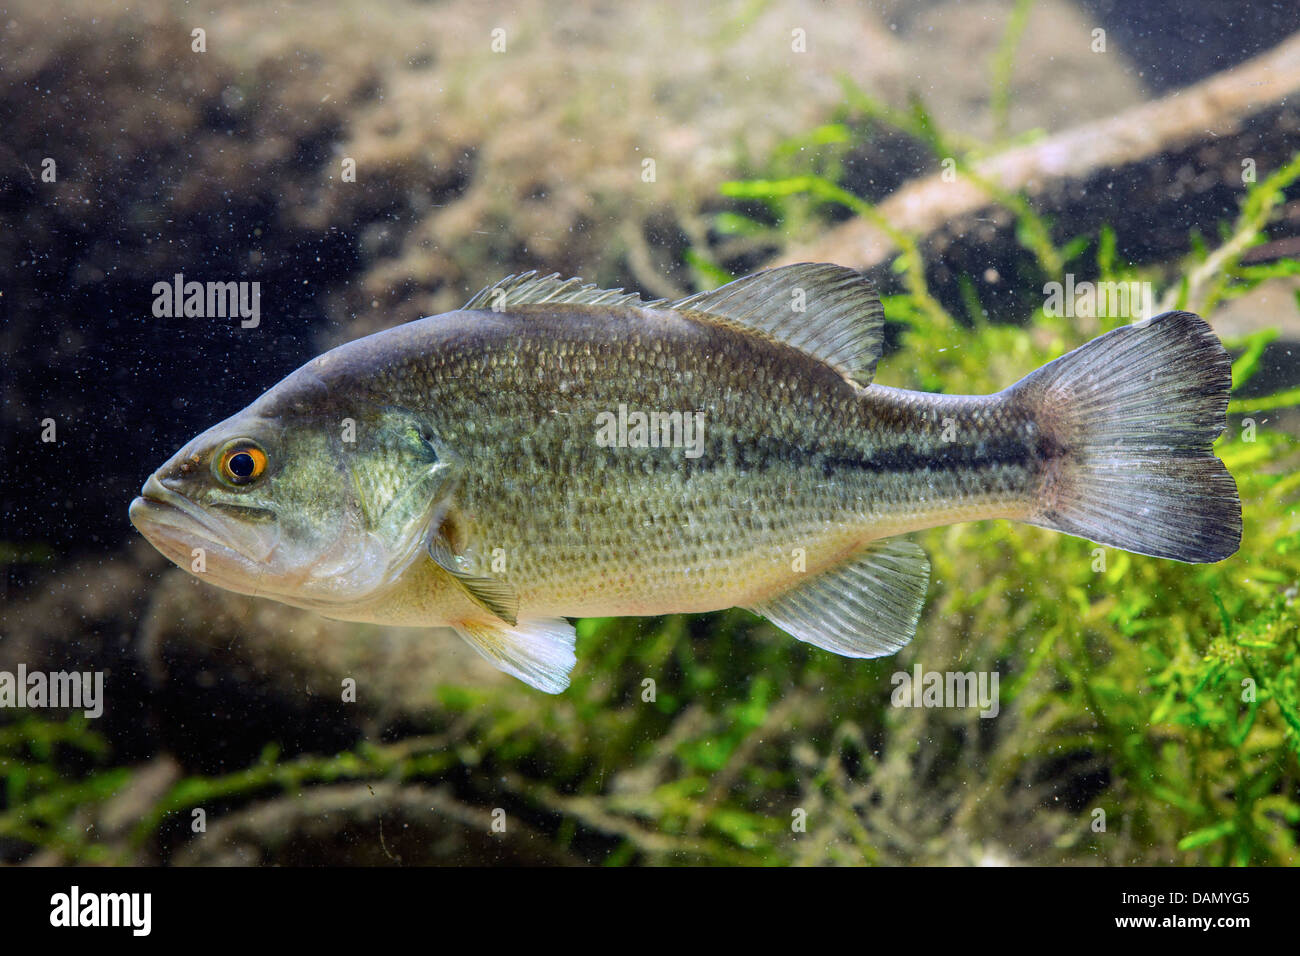 largemouth black bass, largemouth bass (Micropterus salmoides), swimming in front of water plants Stock Photo